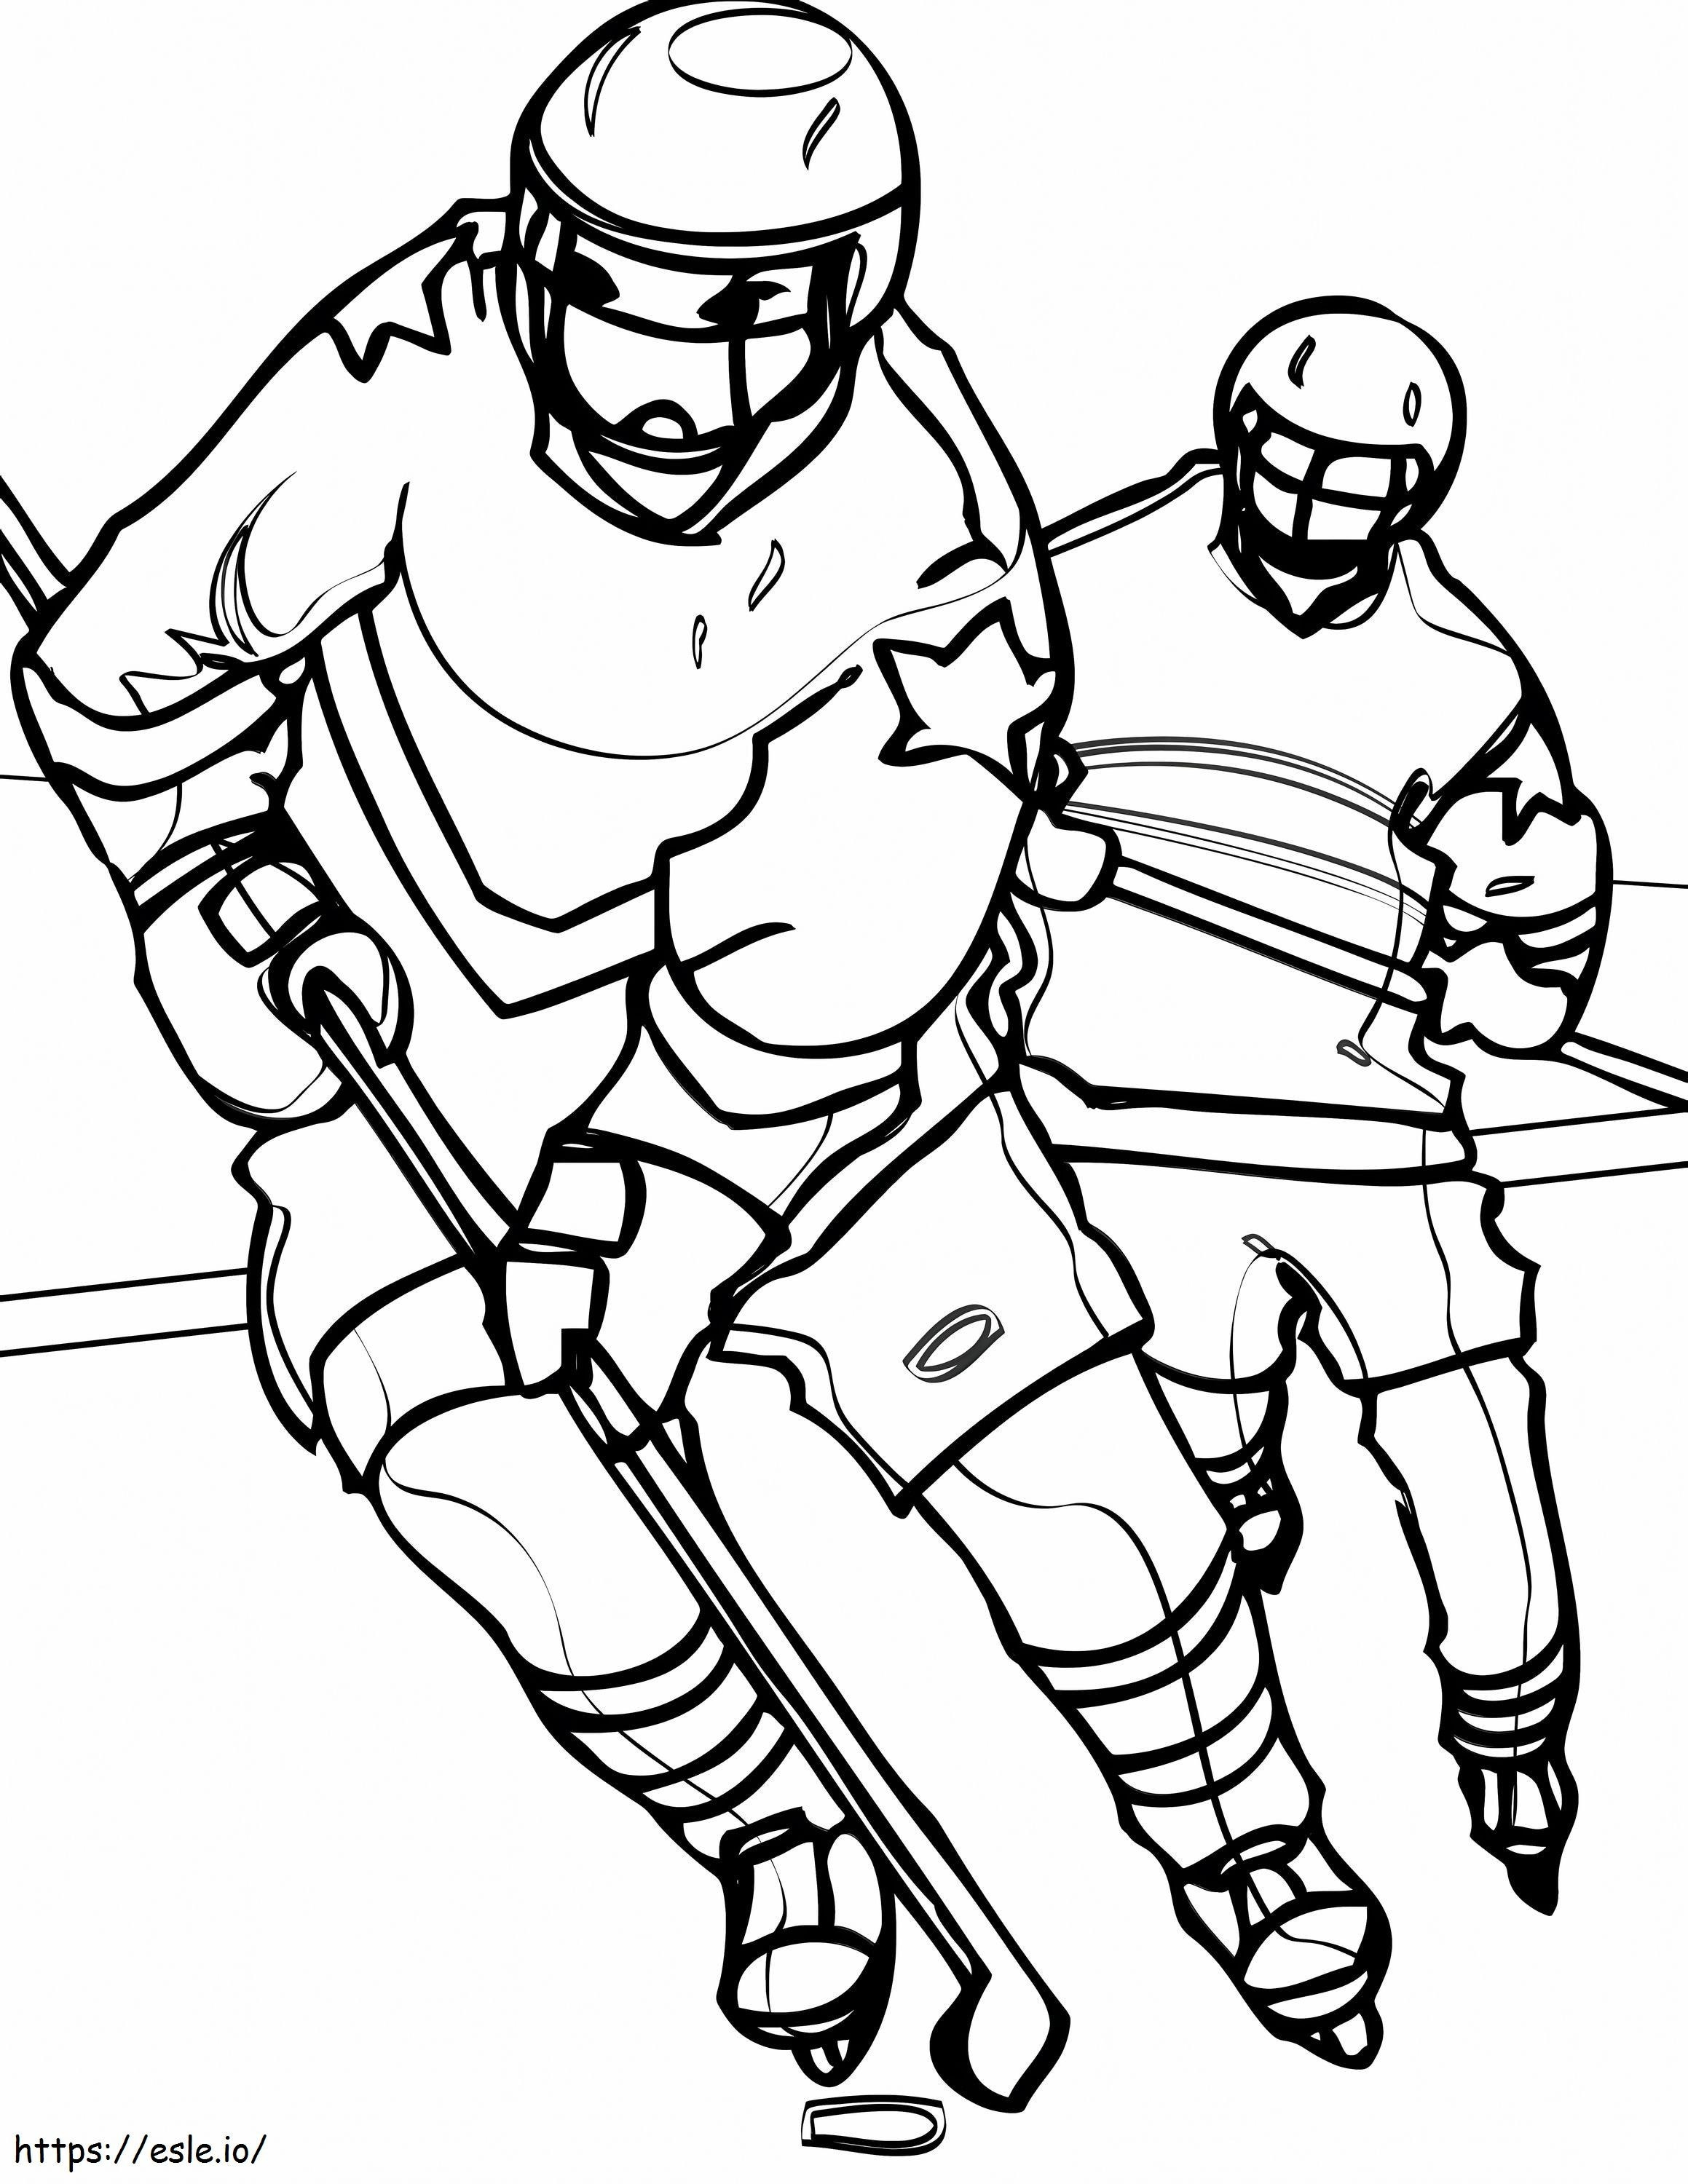 1529115559 Strong Sports Pictures To Color Category For Stunning Day coloring page